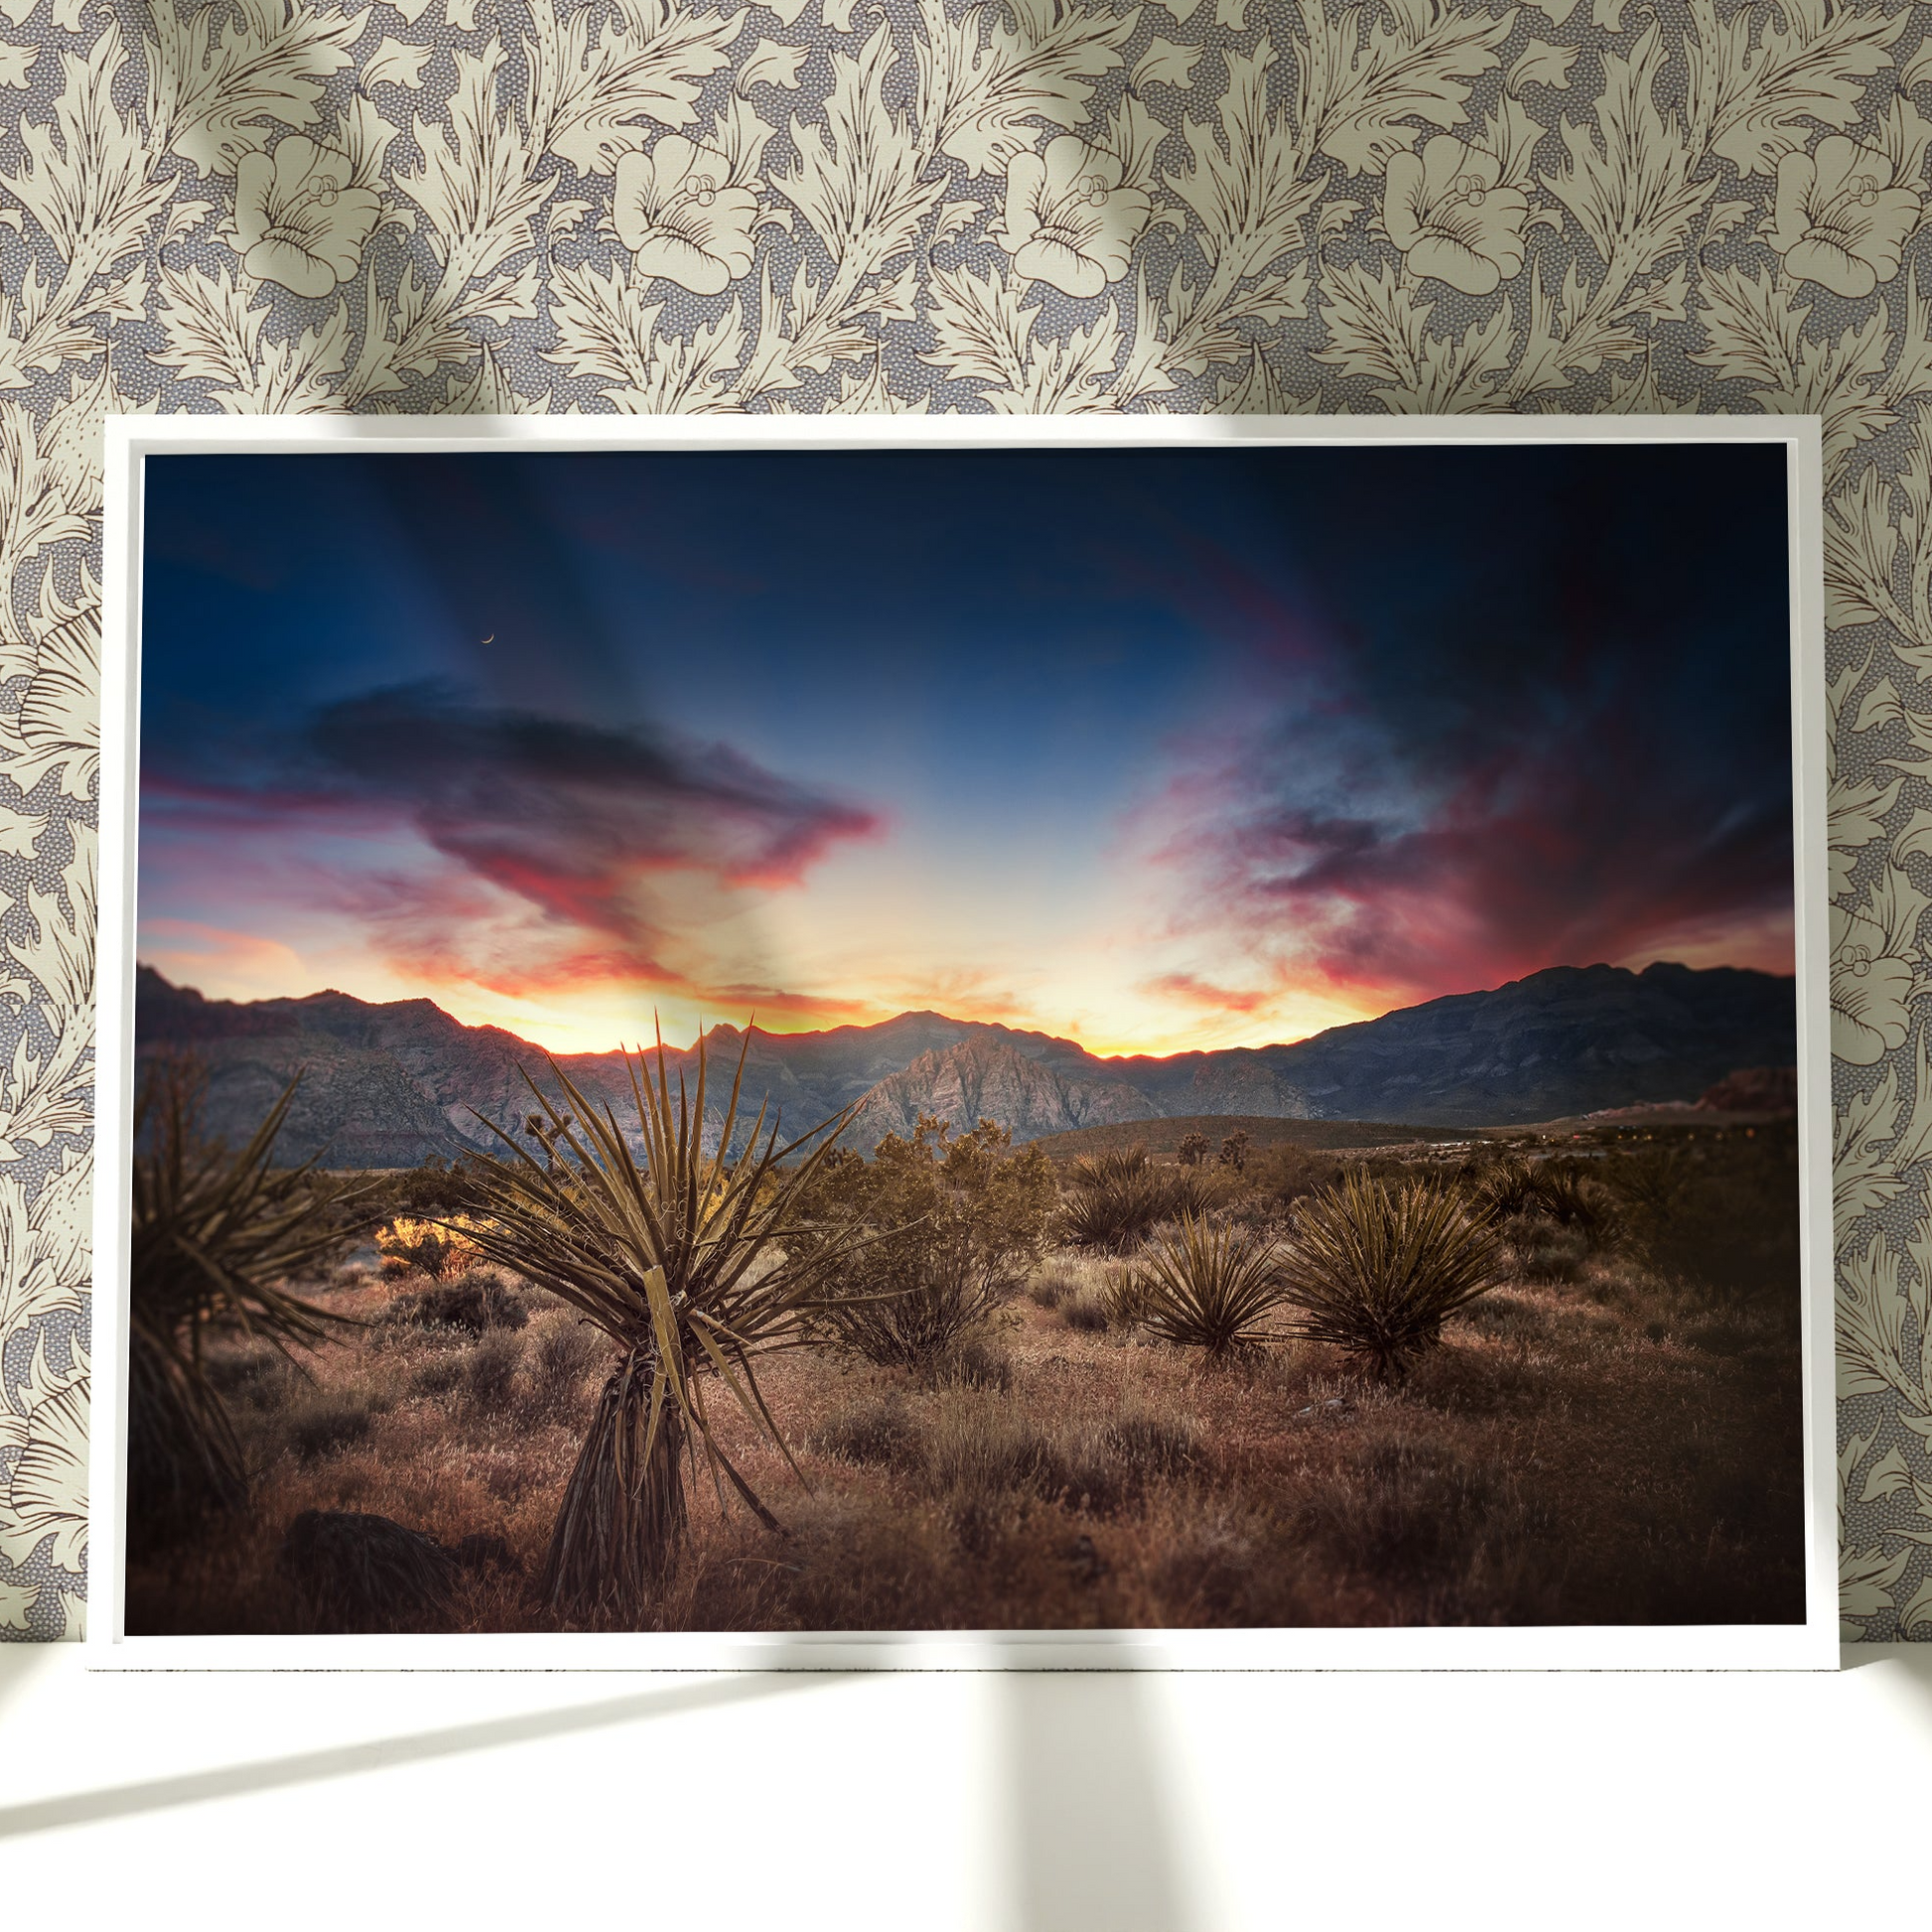 a picture of a sunset in the desert